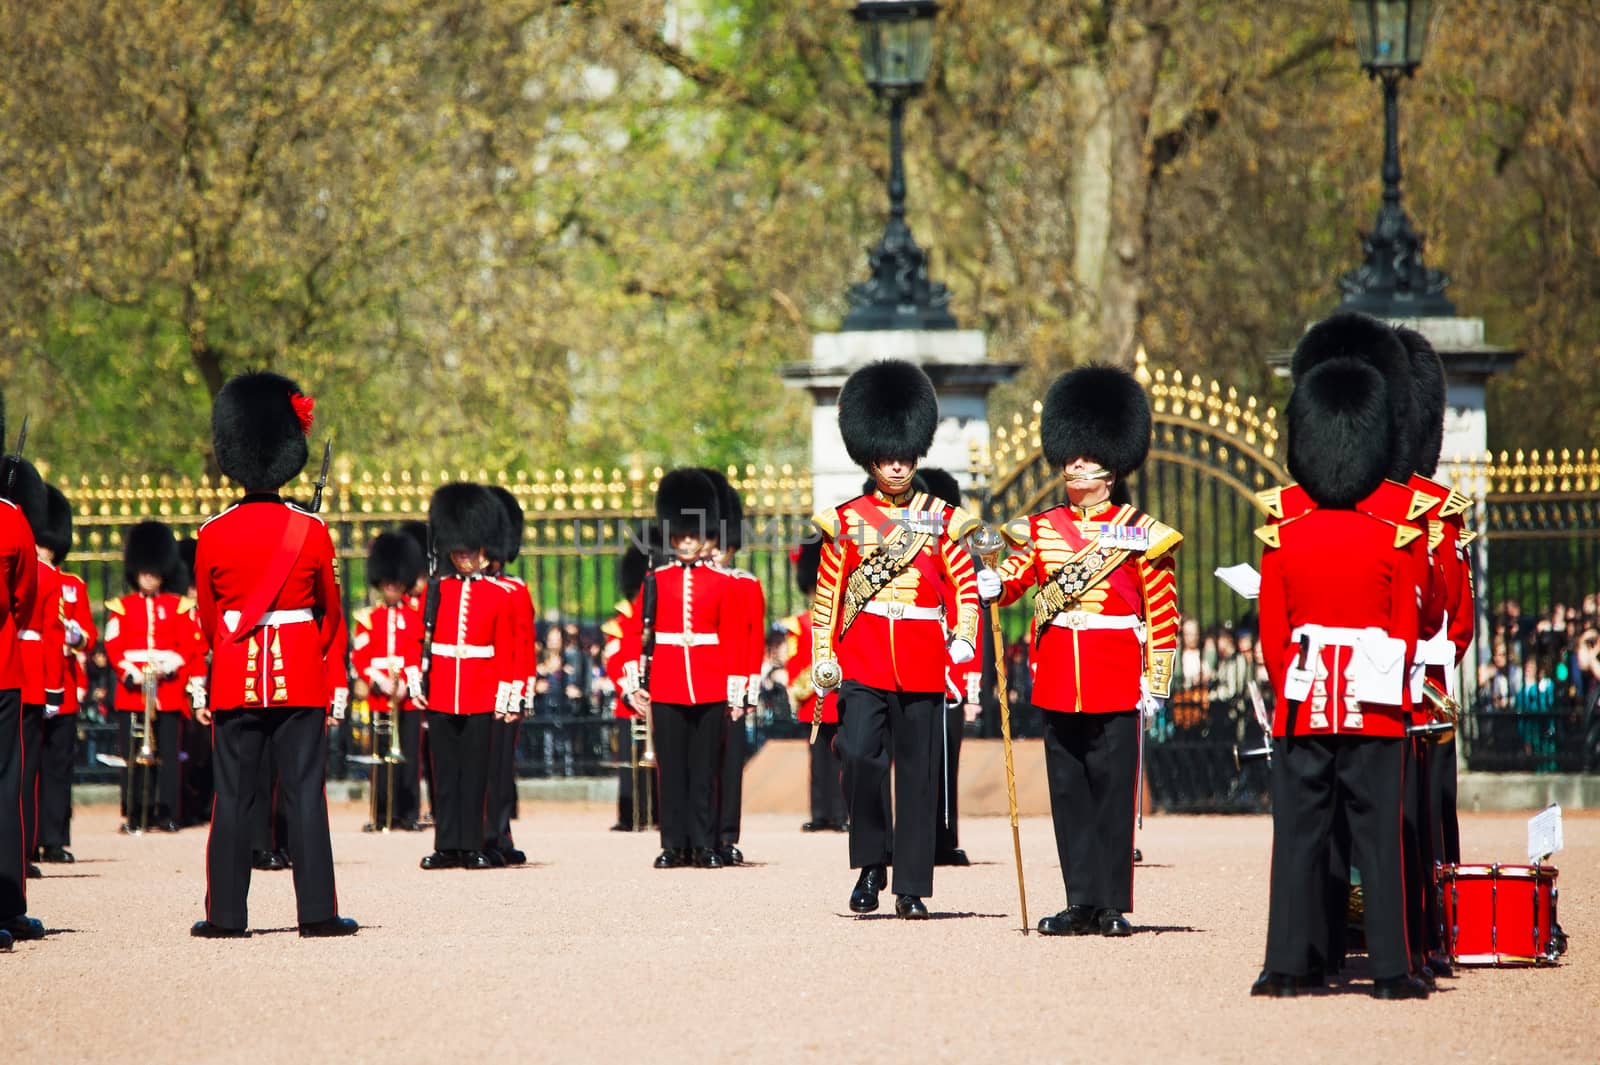 LONDON - APRIL 13: Queen's Guards at the Buckingham palace on April 13, 2015 in London, UK. It's the name given to the contingent of infantry guarding Buckingham Palace and St James's Palace.